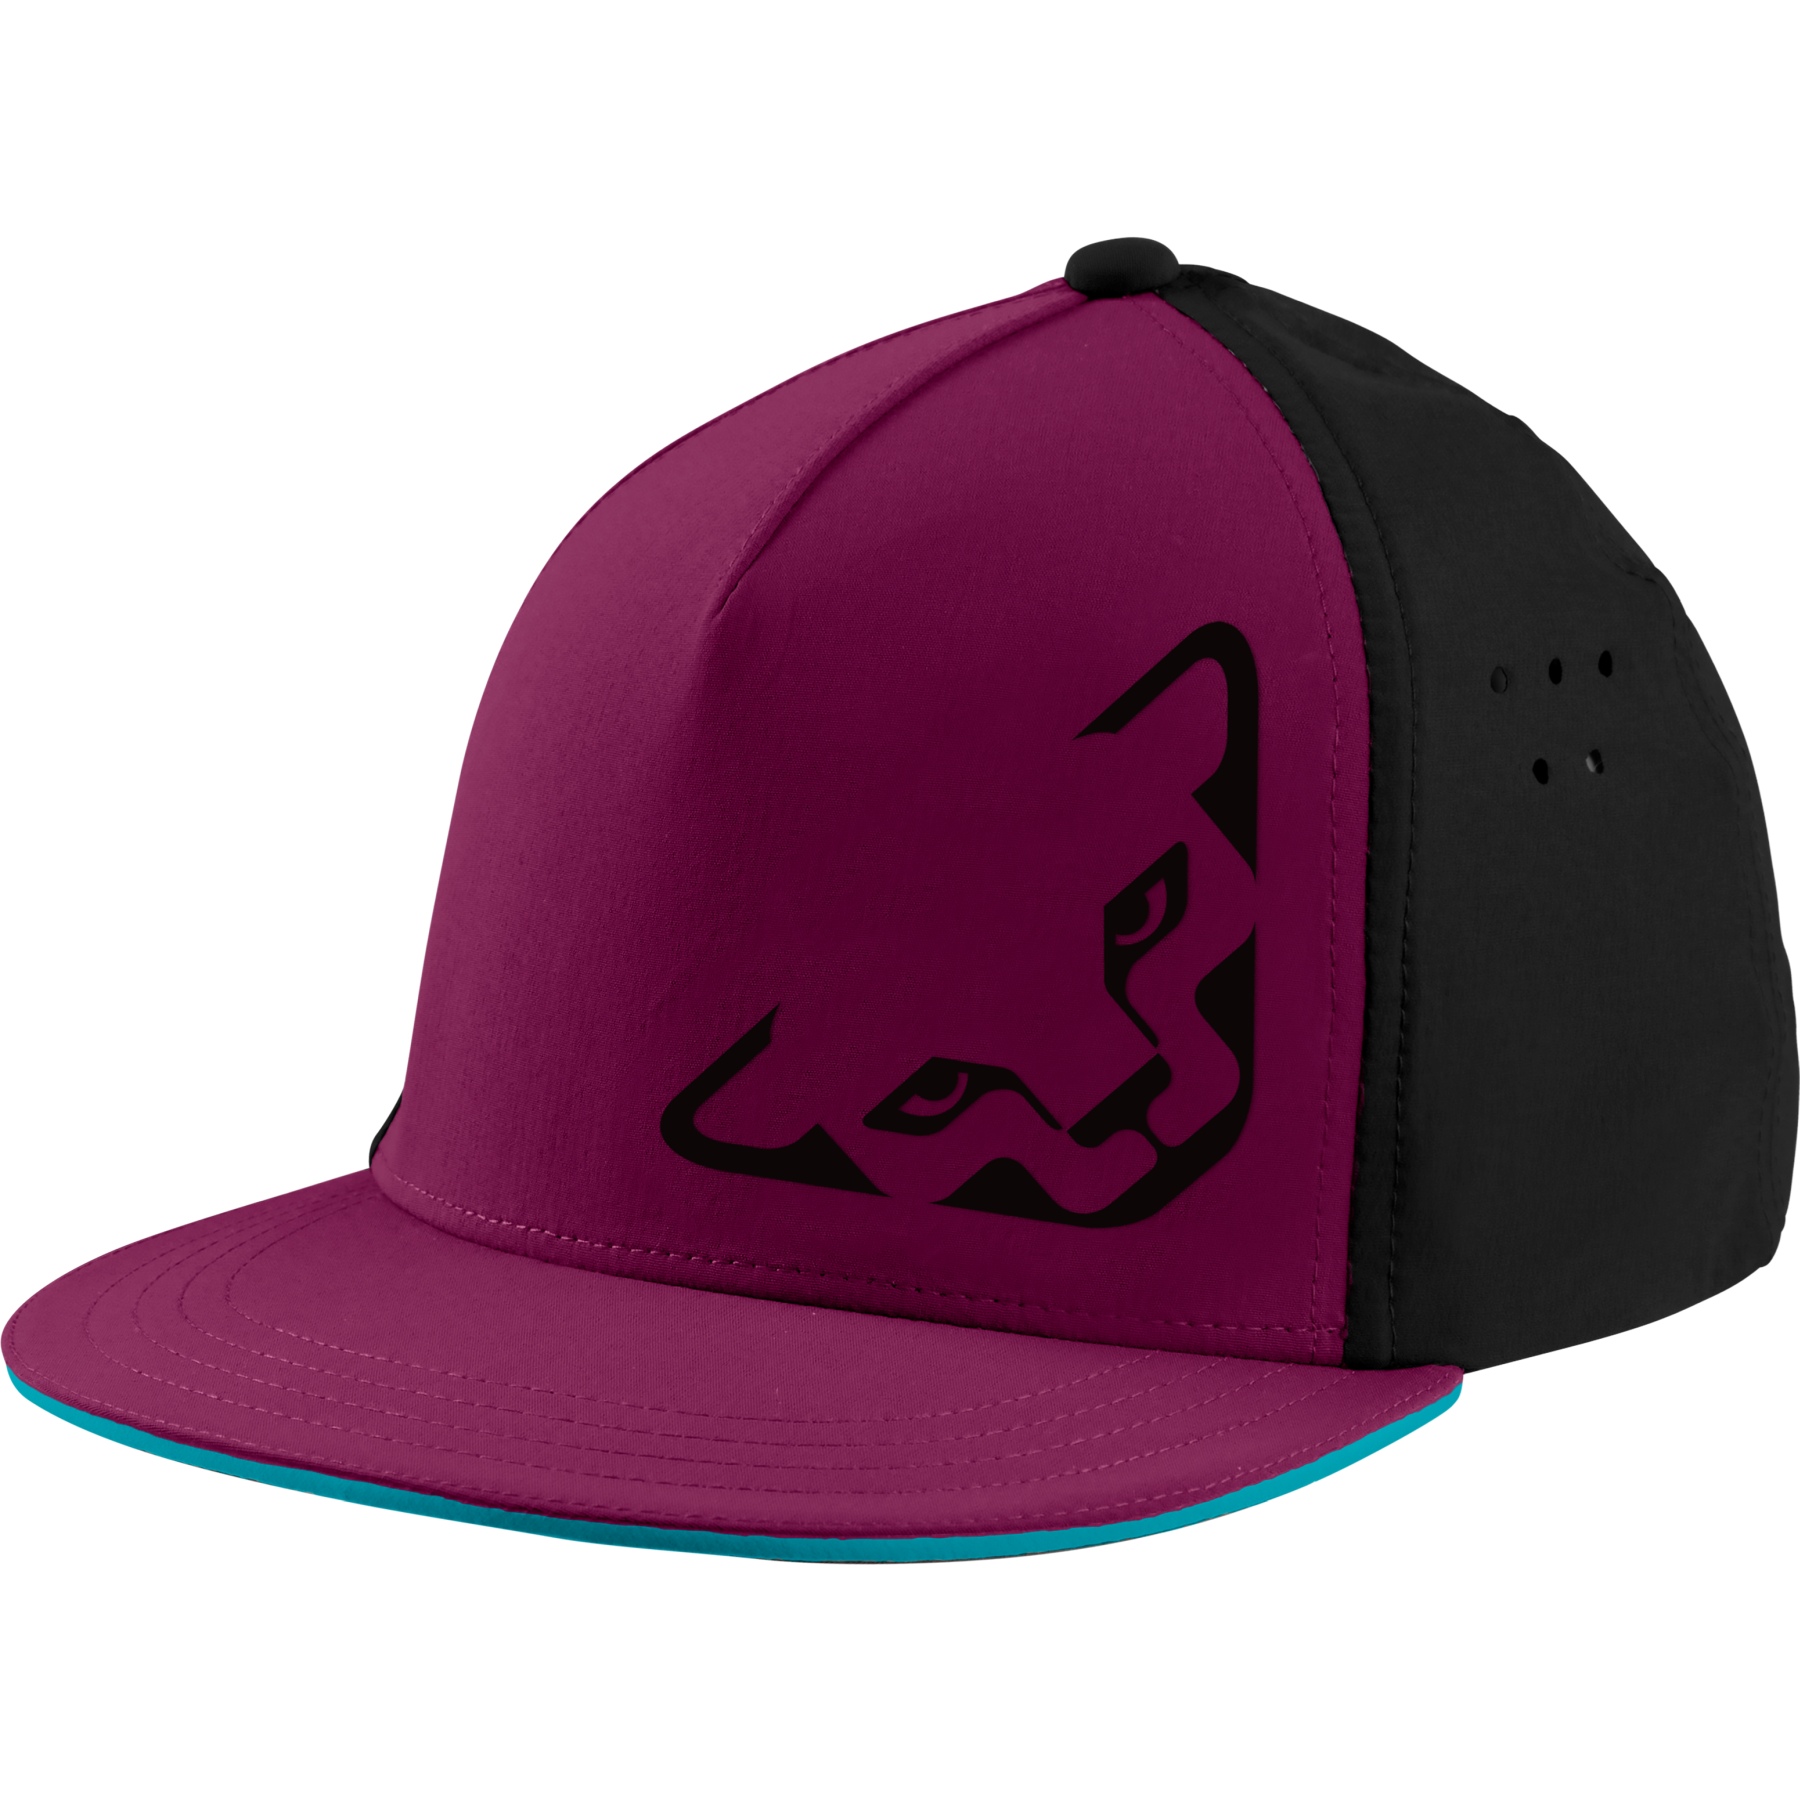 Picture of Dynafit Tech Trucker Cap - Beet Red